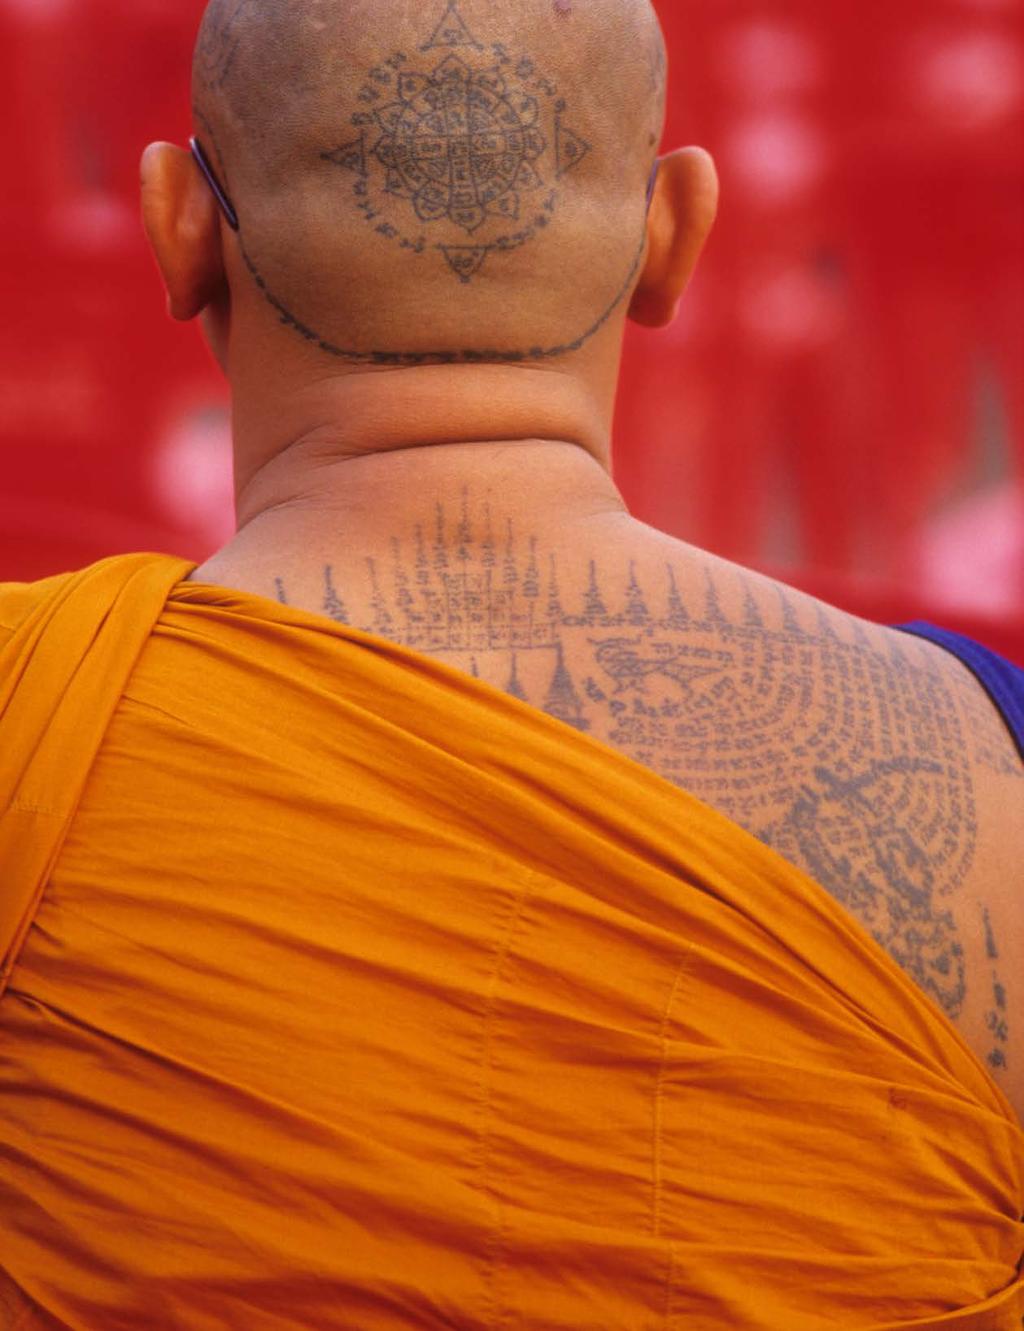 Indelible This Theravada Buddhist monk of Wat Bang Phra in Thailand has a sacred Mongkut Phra Puttha Chao